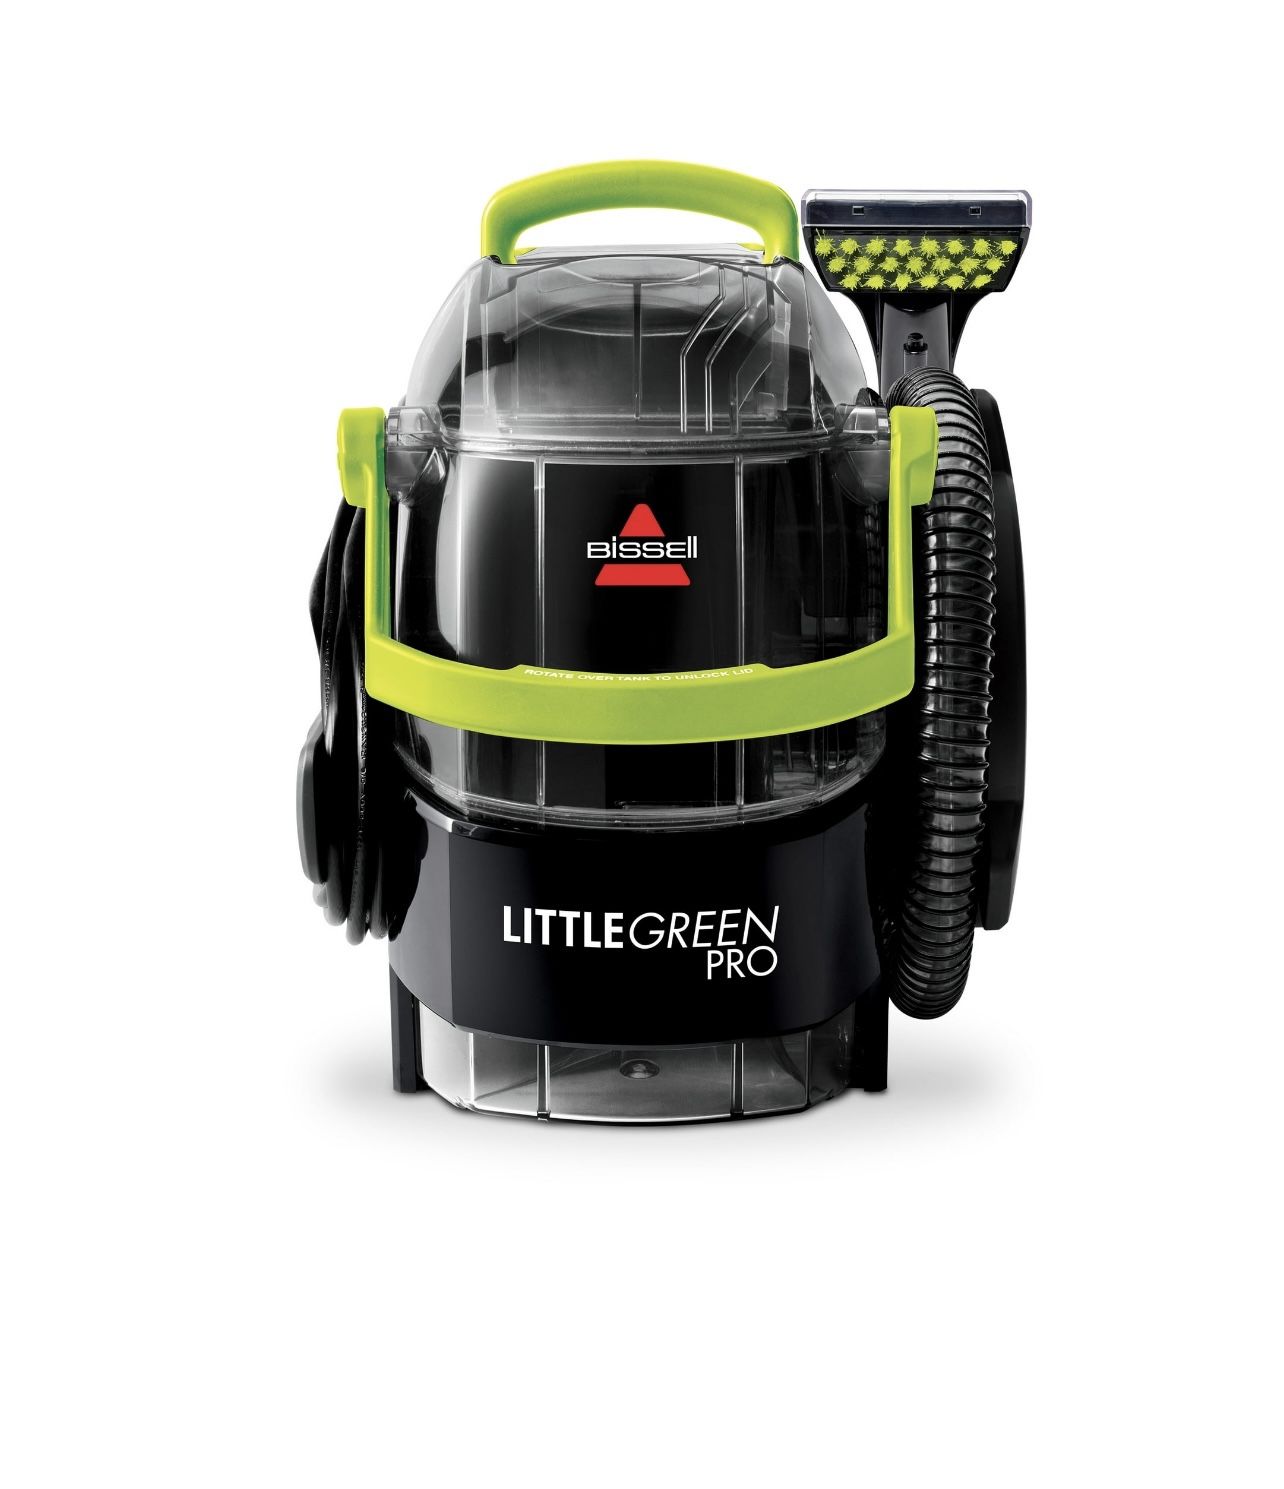 BISSELL 2505 Little Green Pro Multicolor Compact Cleaner